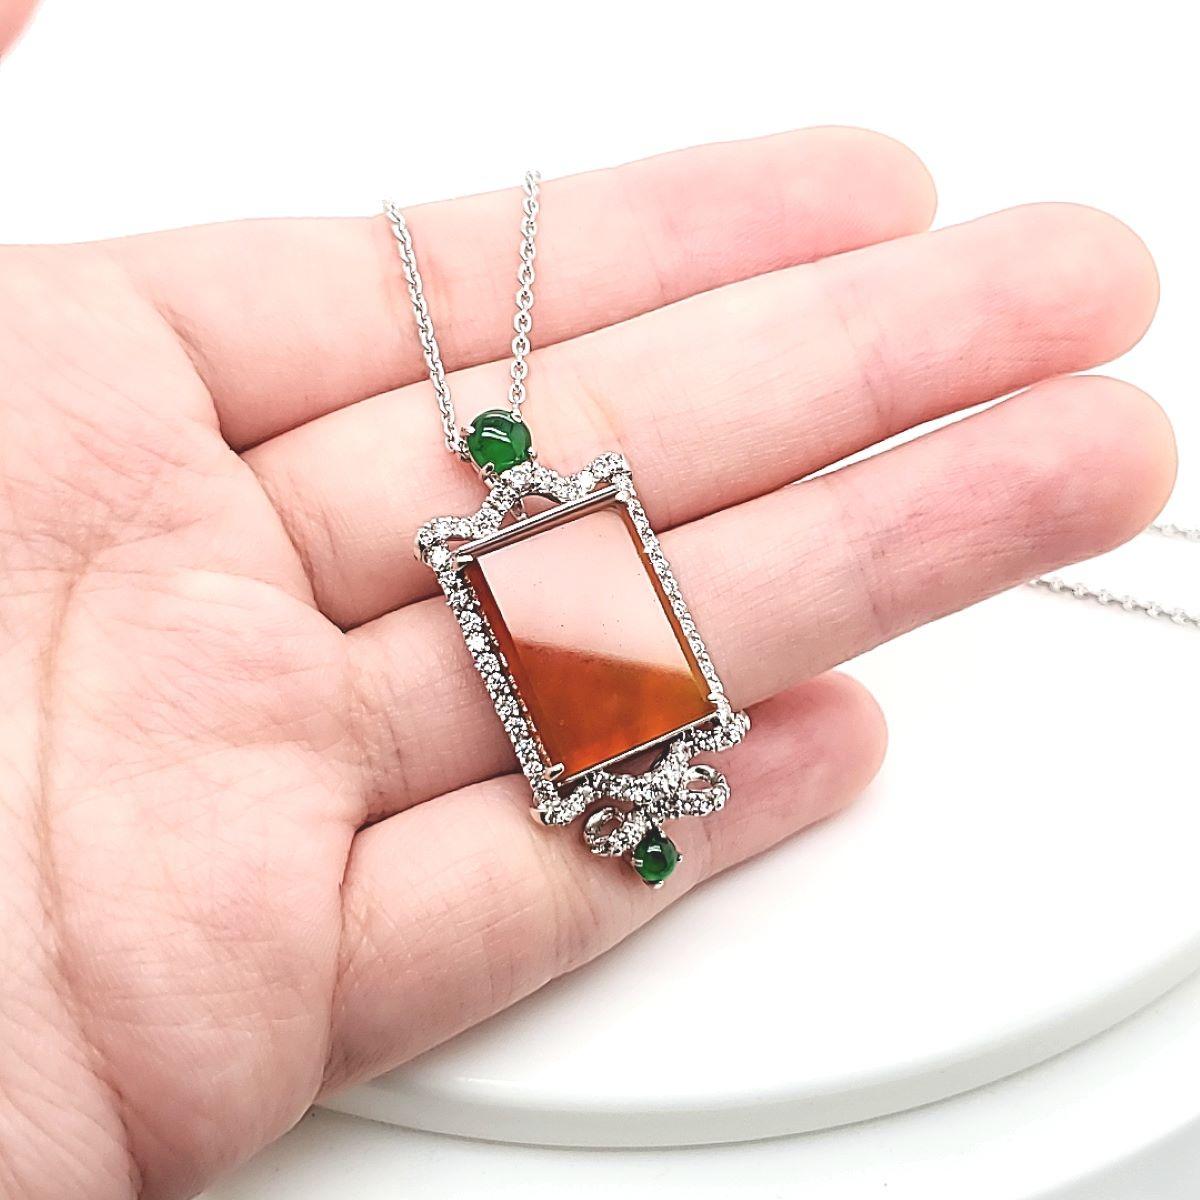 Red Jade and Diamond Cts 0.79 Pendant Necklace With 18k White Gold Chain For Sale 1